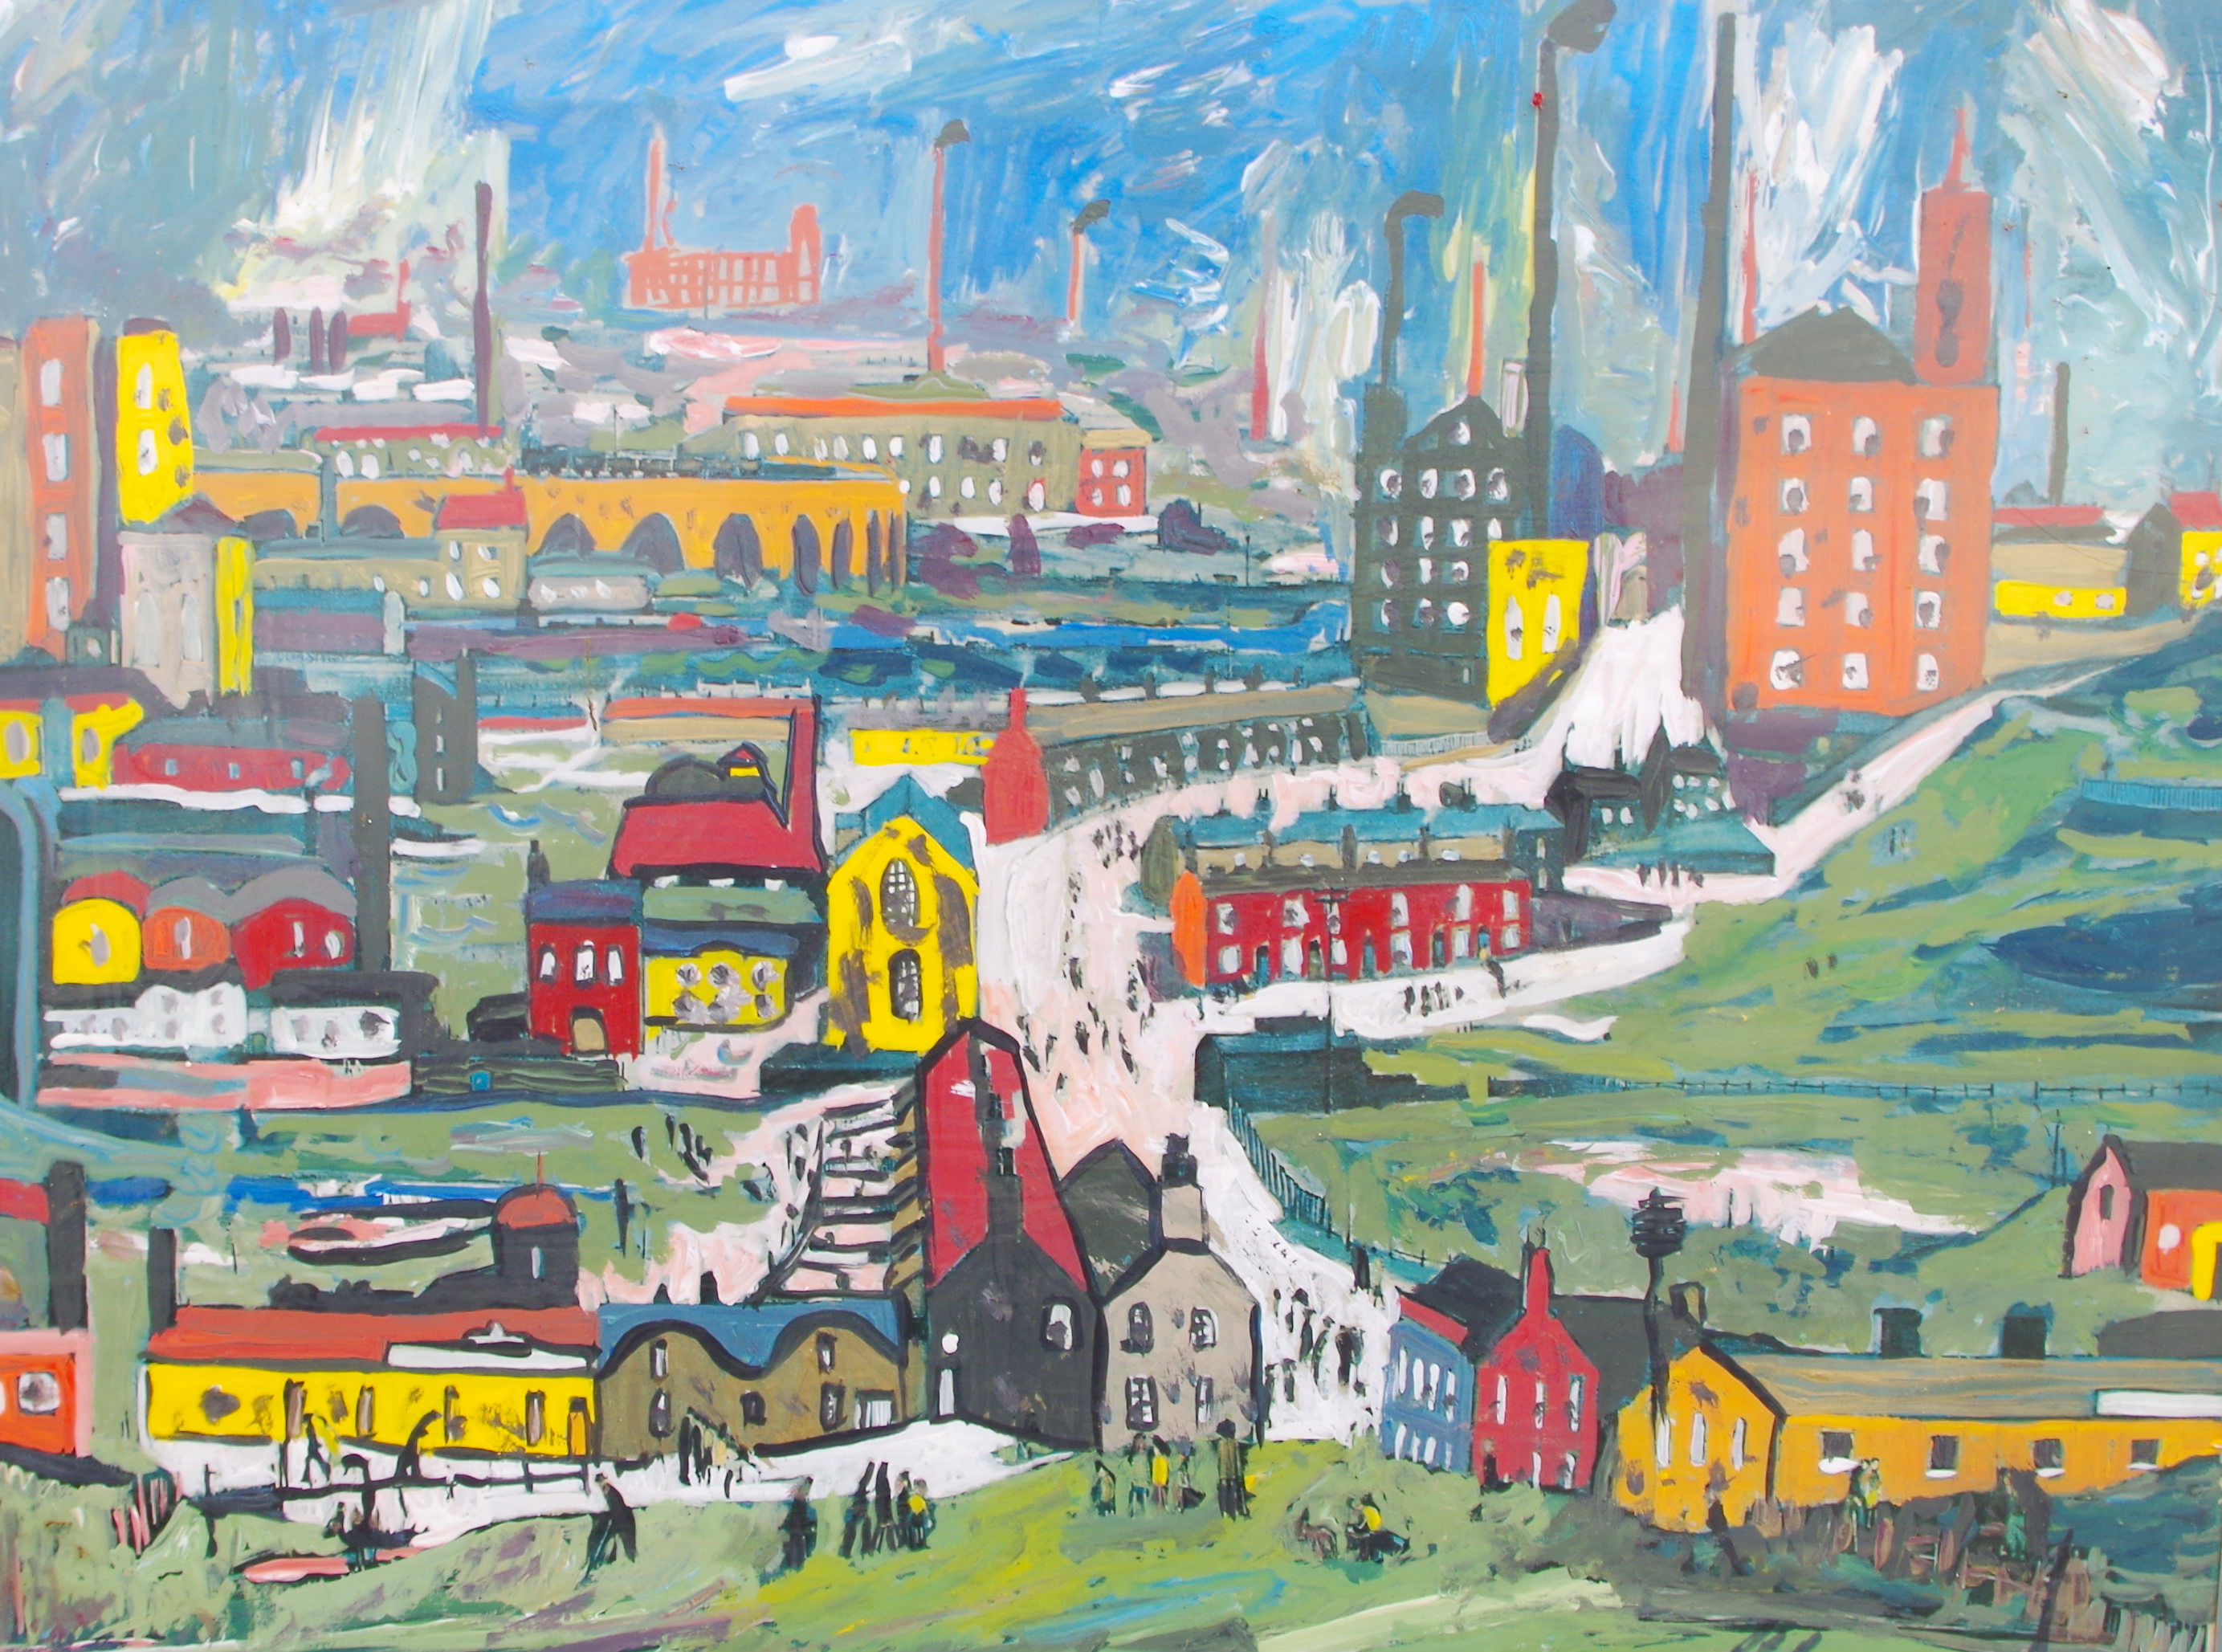 'Northern Town' by BB Bango 36 by 24 inch acrylic on canvas. Sold to art collector in UK